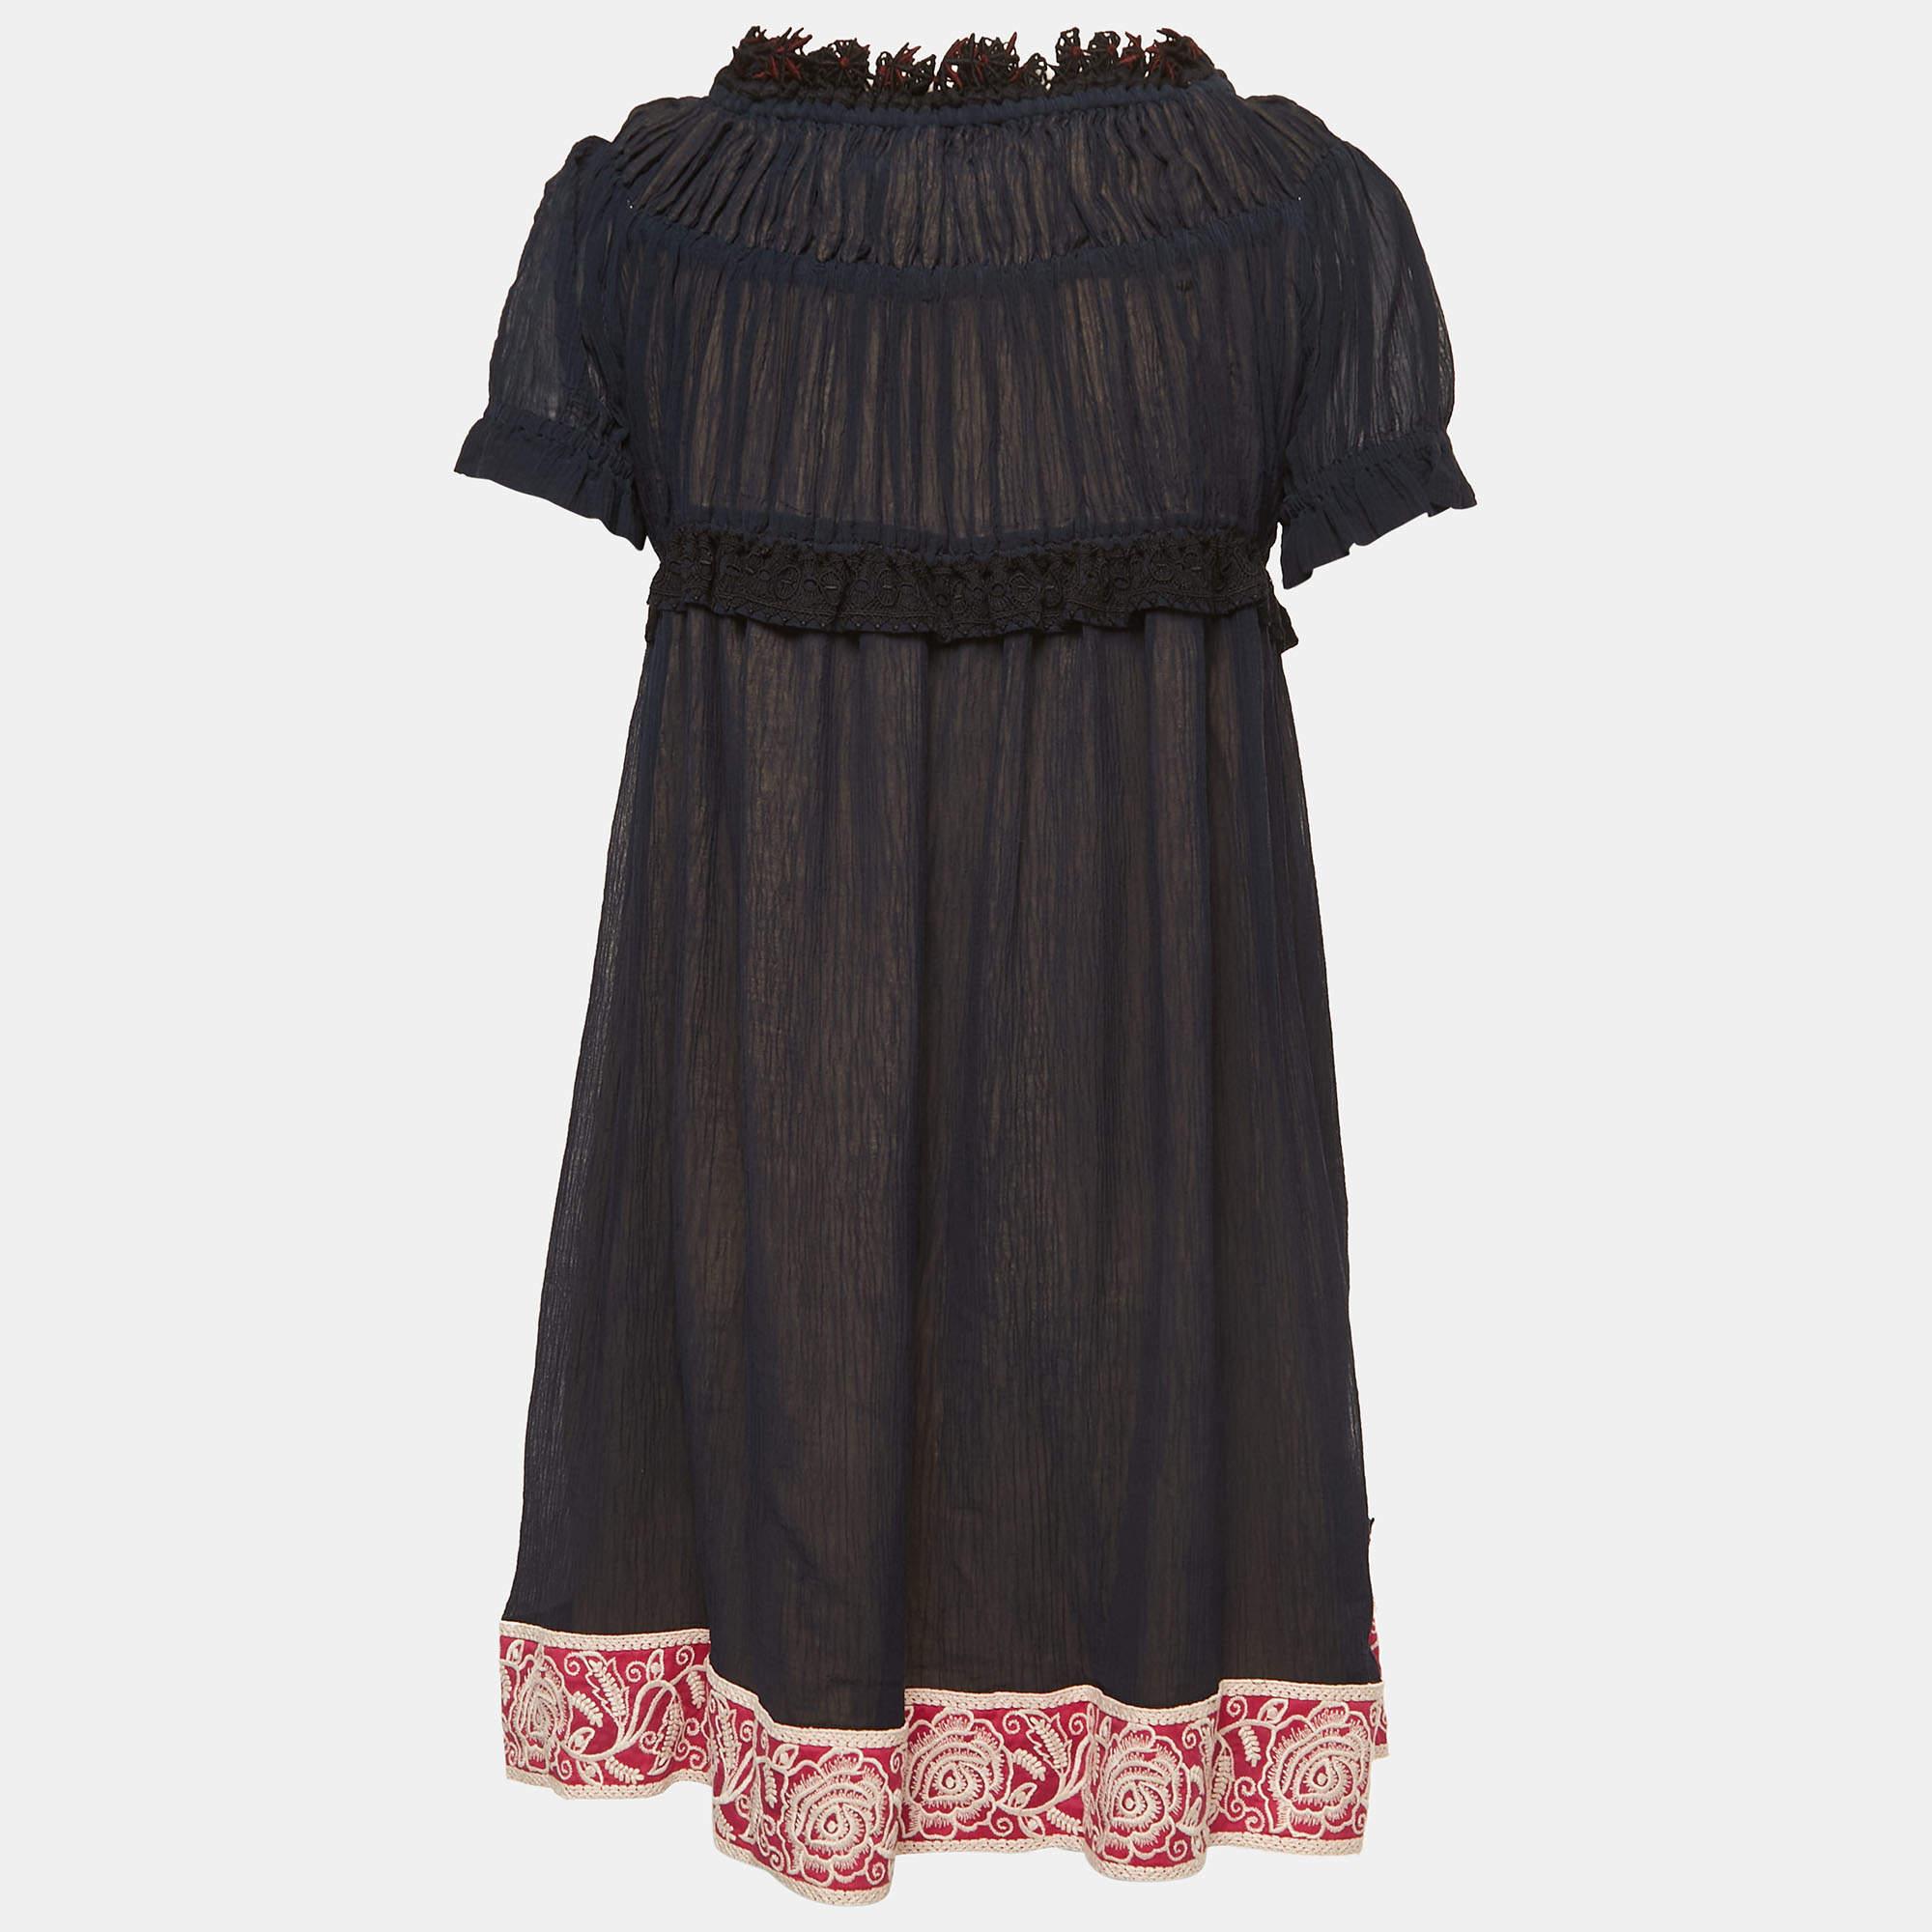 This Chloe dress brings elegant details and a chic silhouette. Featuring short sleeves and lace trims, this dress is a winner with flats as well as heels. It is made from the finest materials and is bound to give you comfort.

